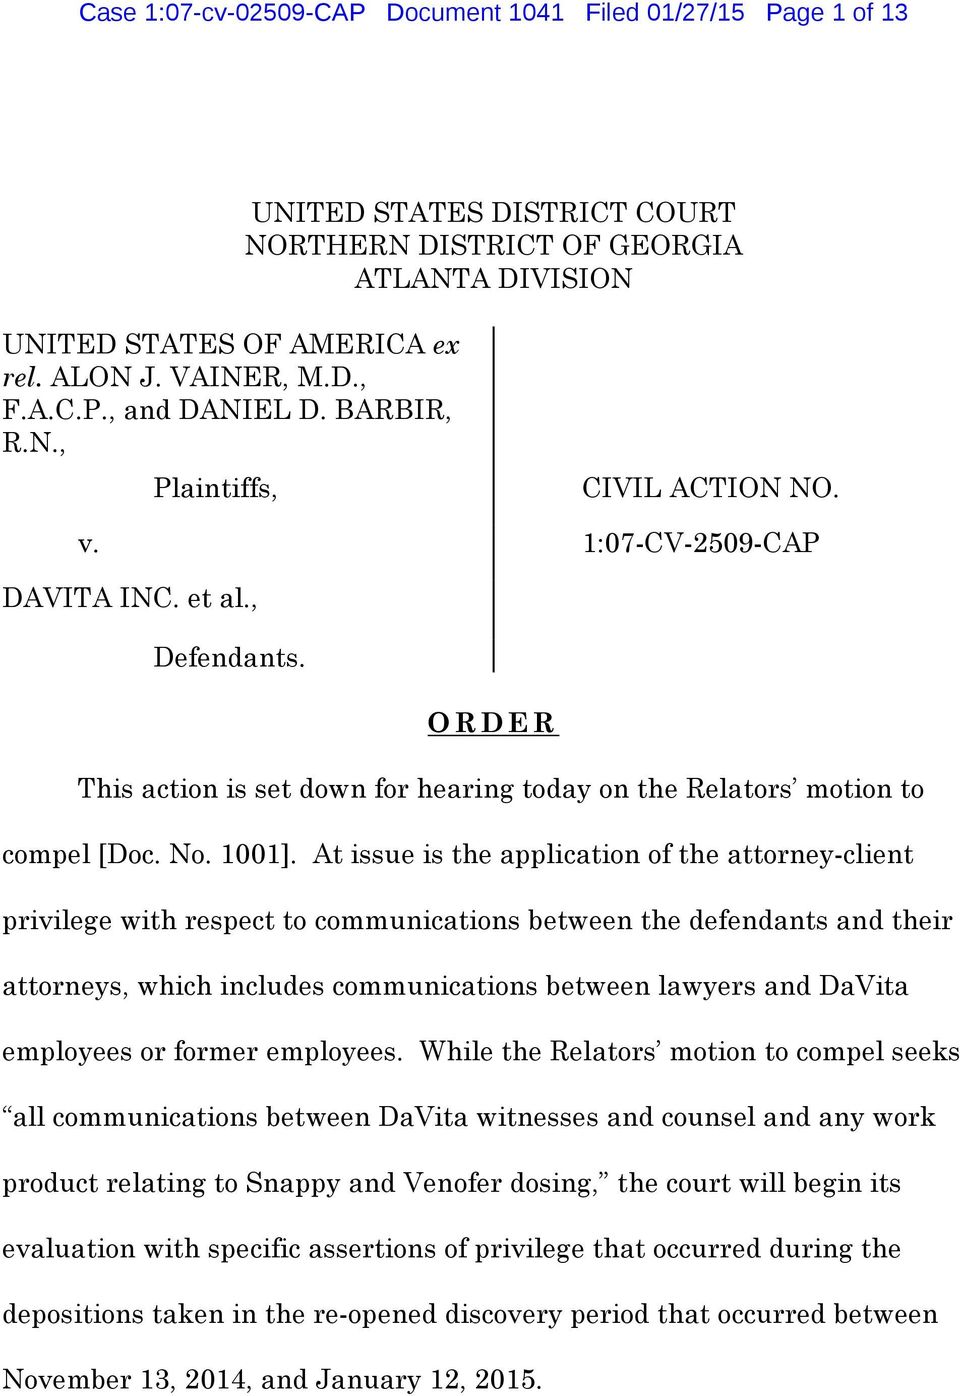 At issue is the application of the attorney-client privilege with respect to communications between the defendants and their attorneys, which includes communications between lawyers and DaVita